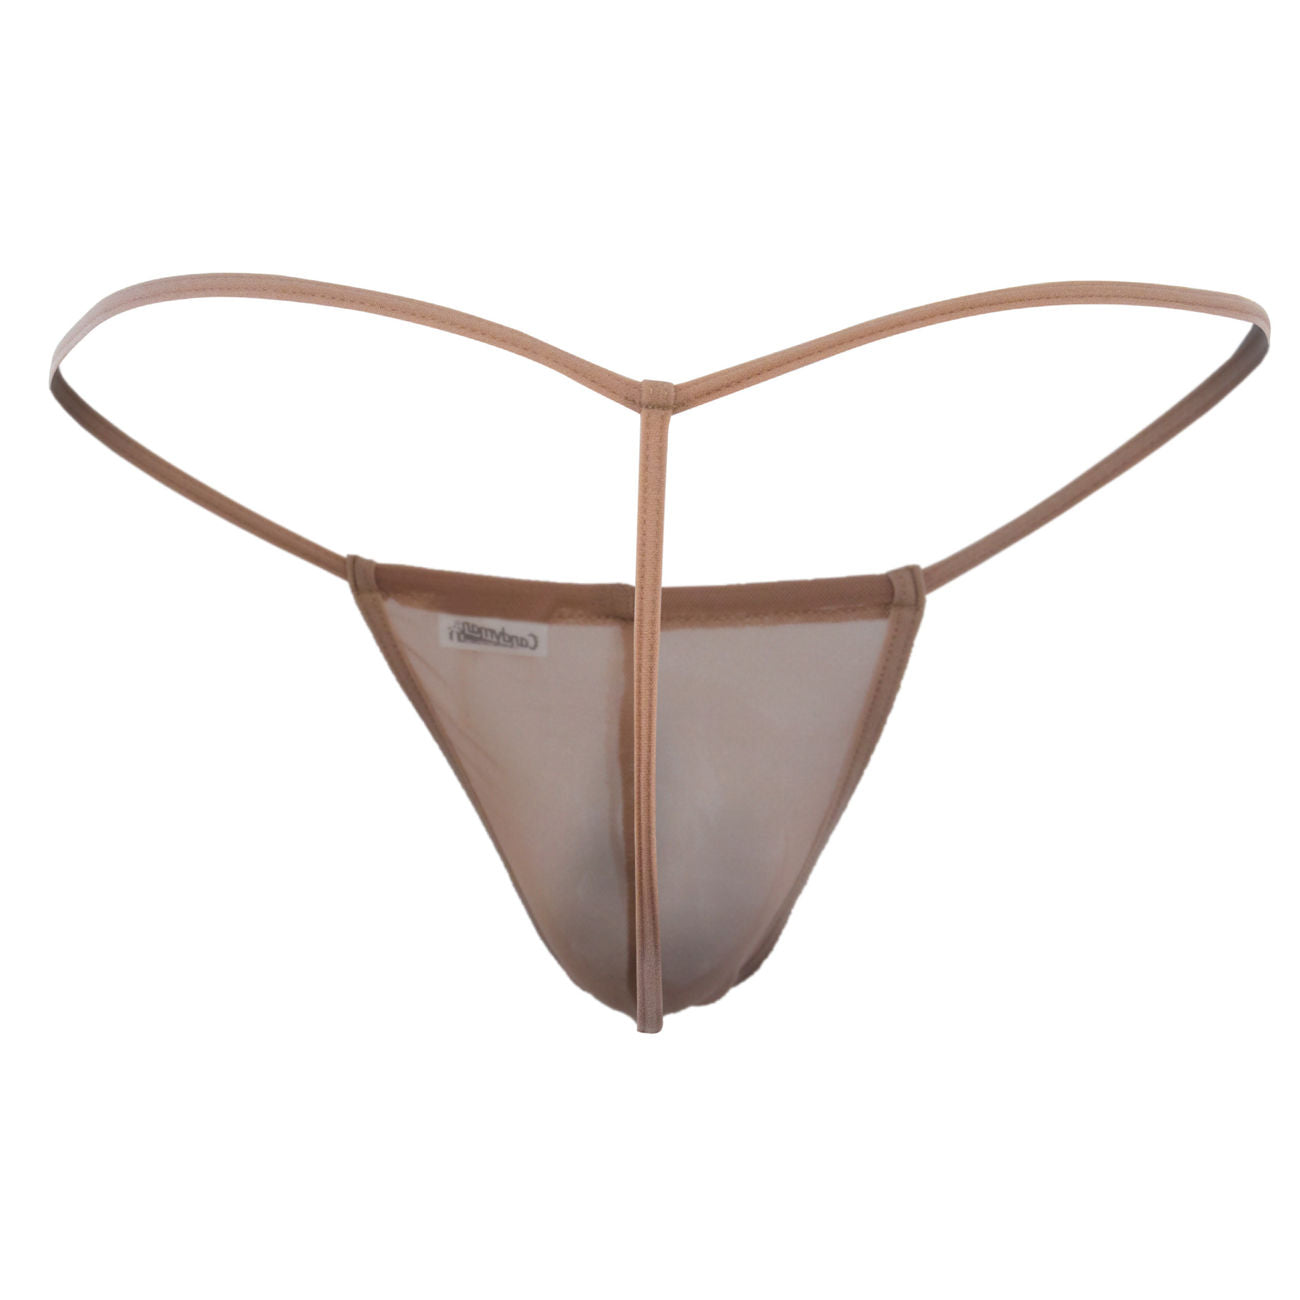 CandyMan 99246 Thongs Color Beige